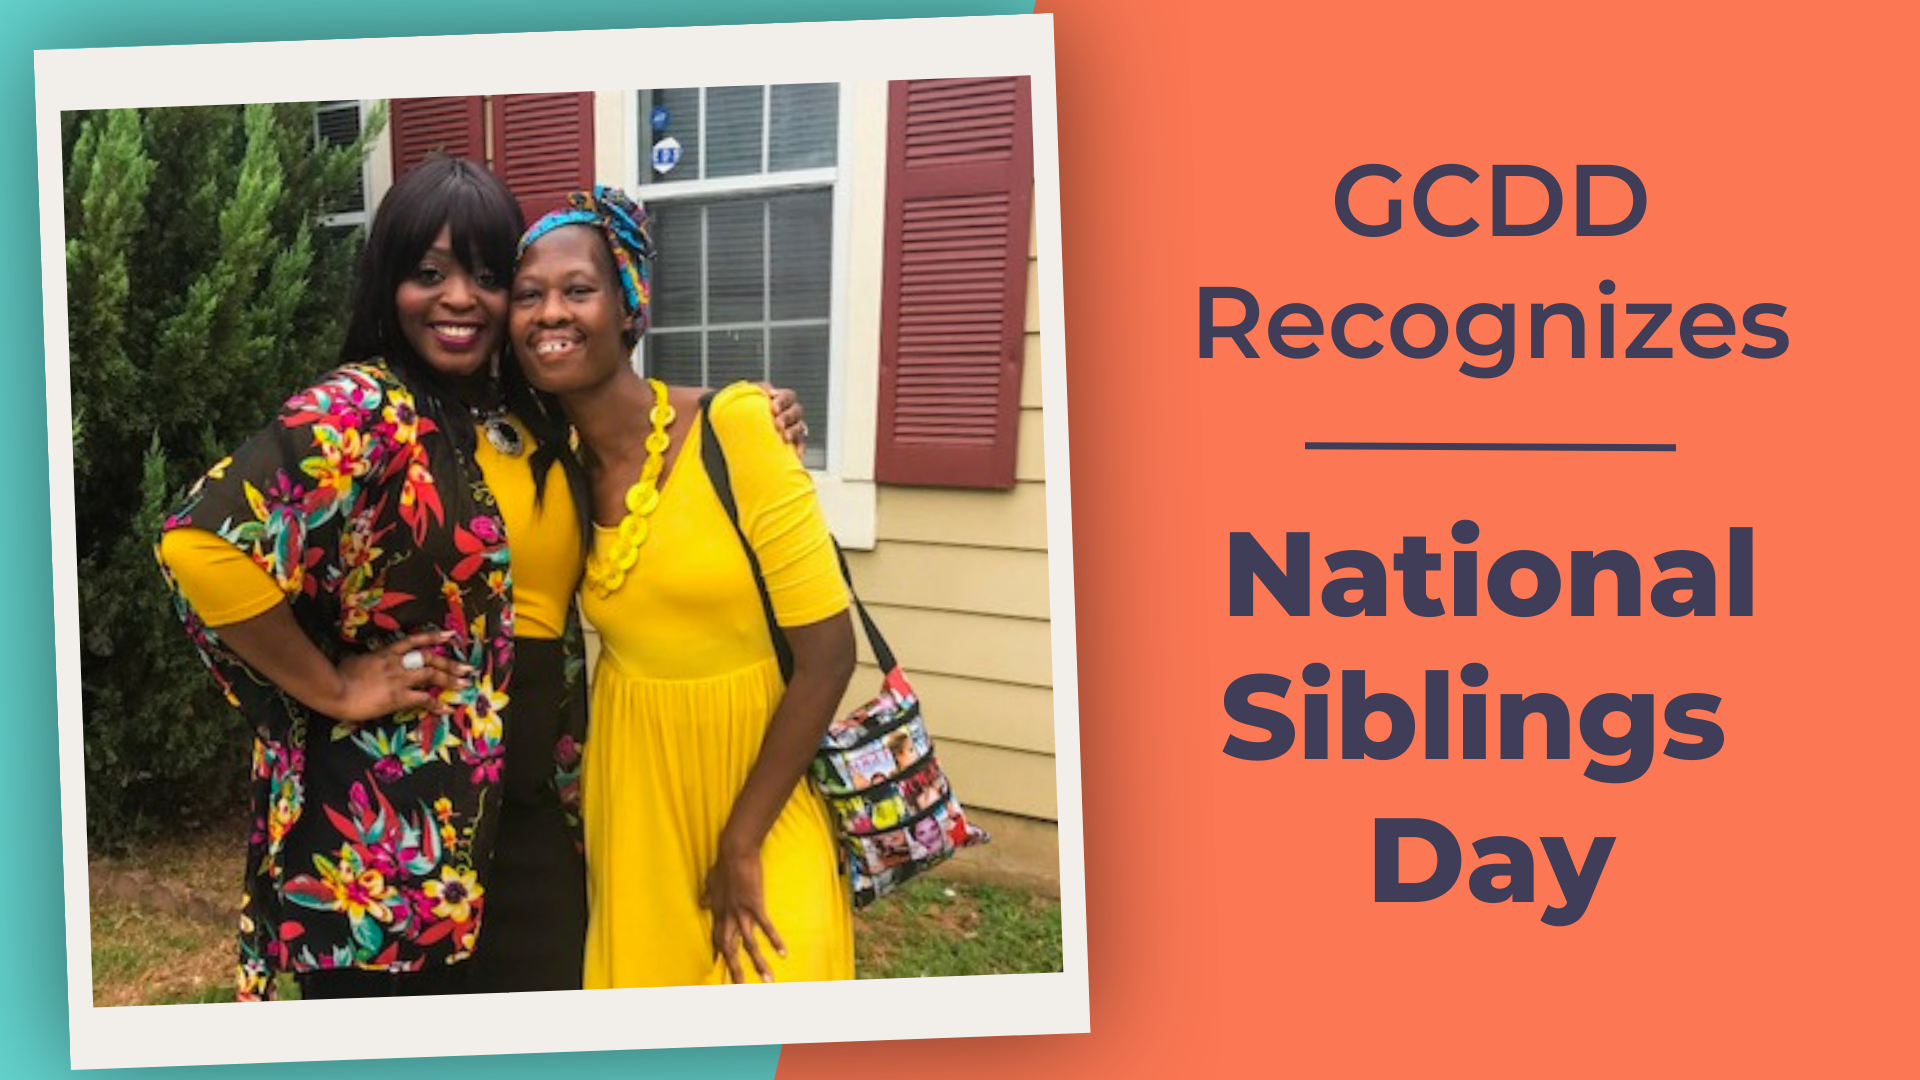 GCDD Recognizes National Siblings Day